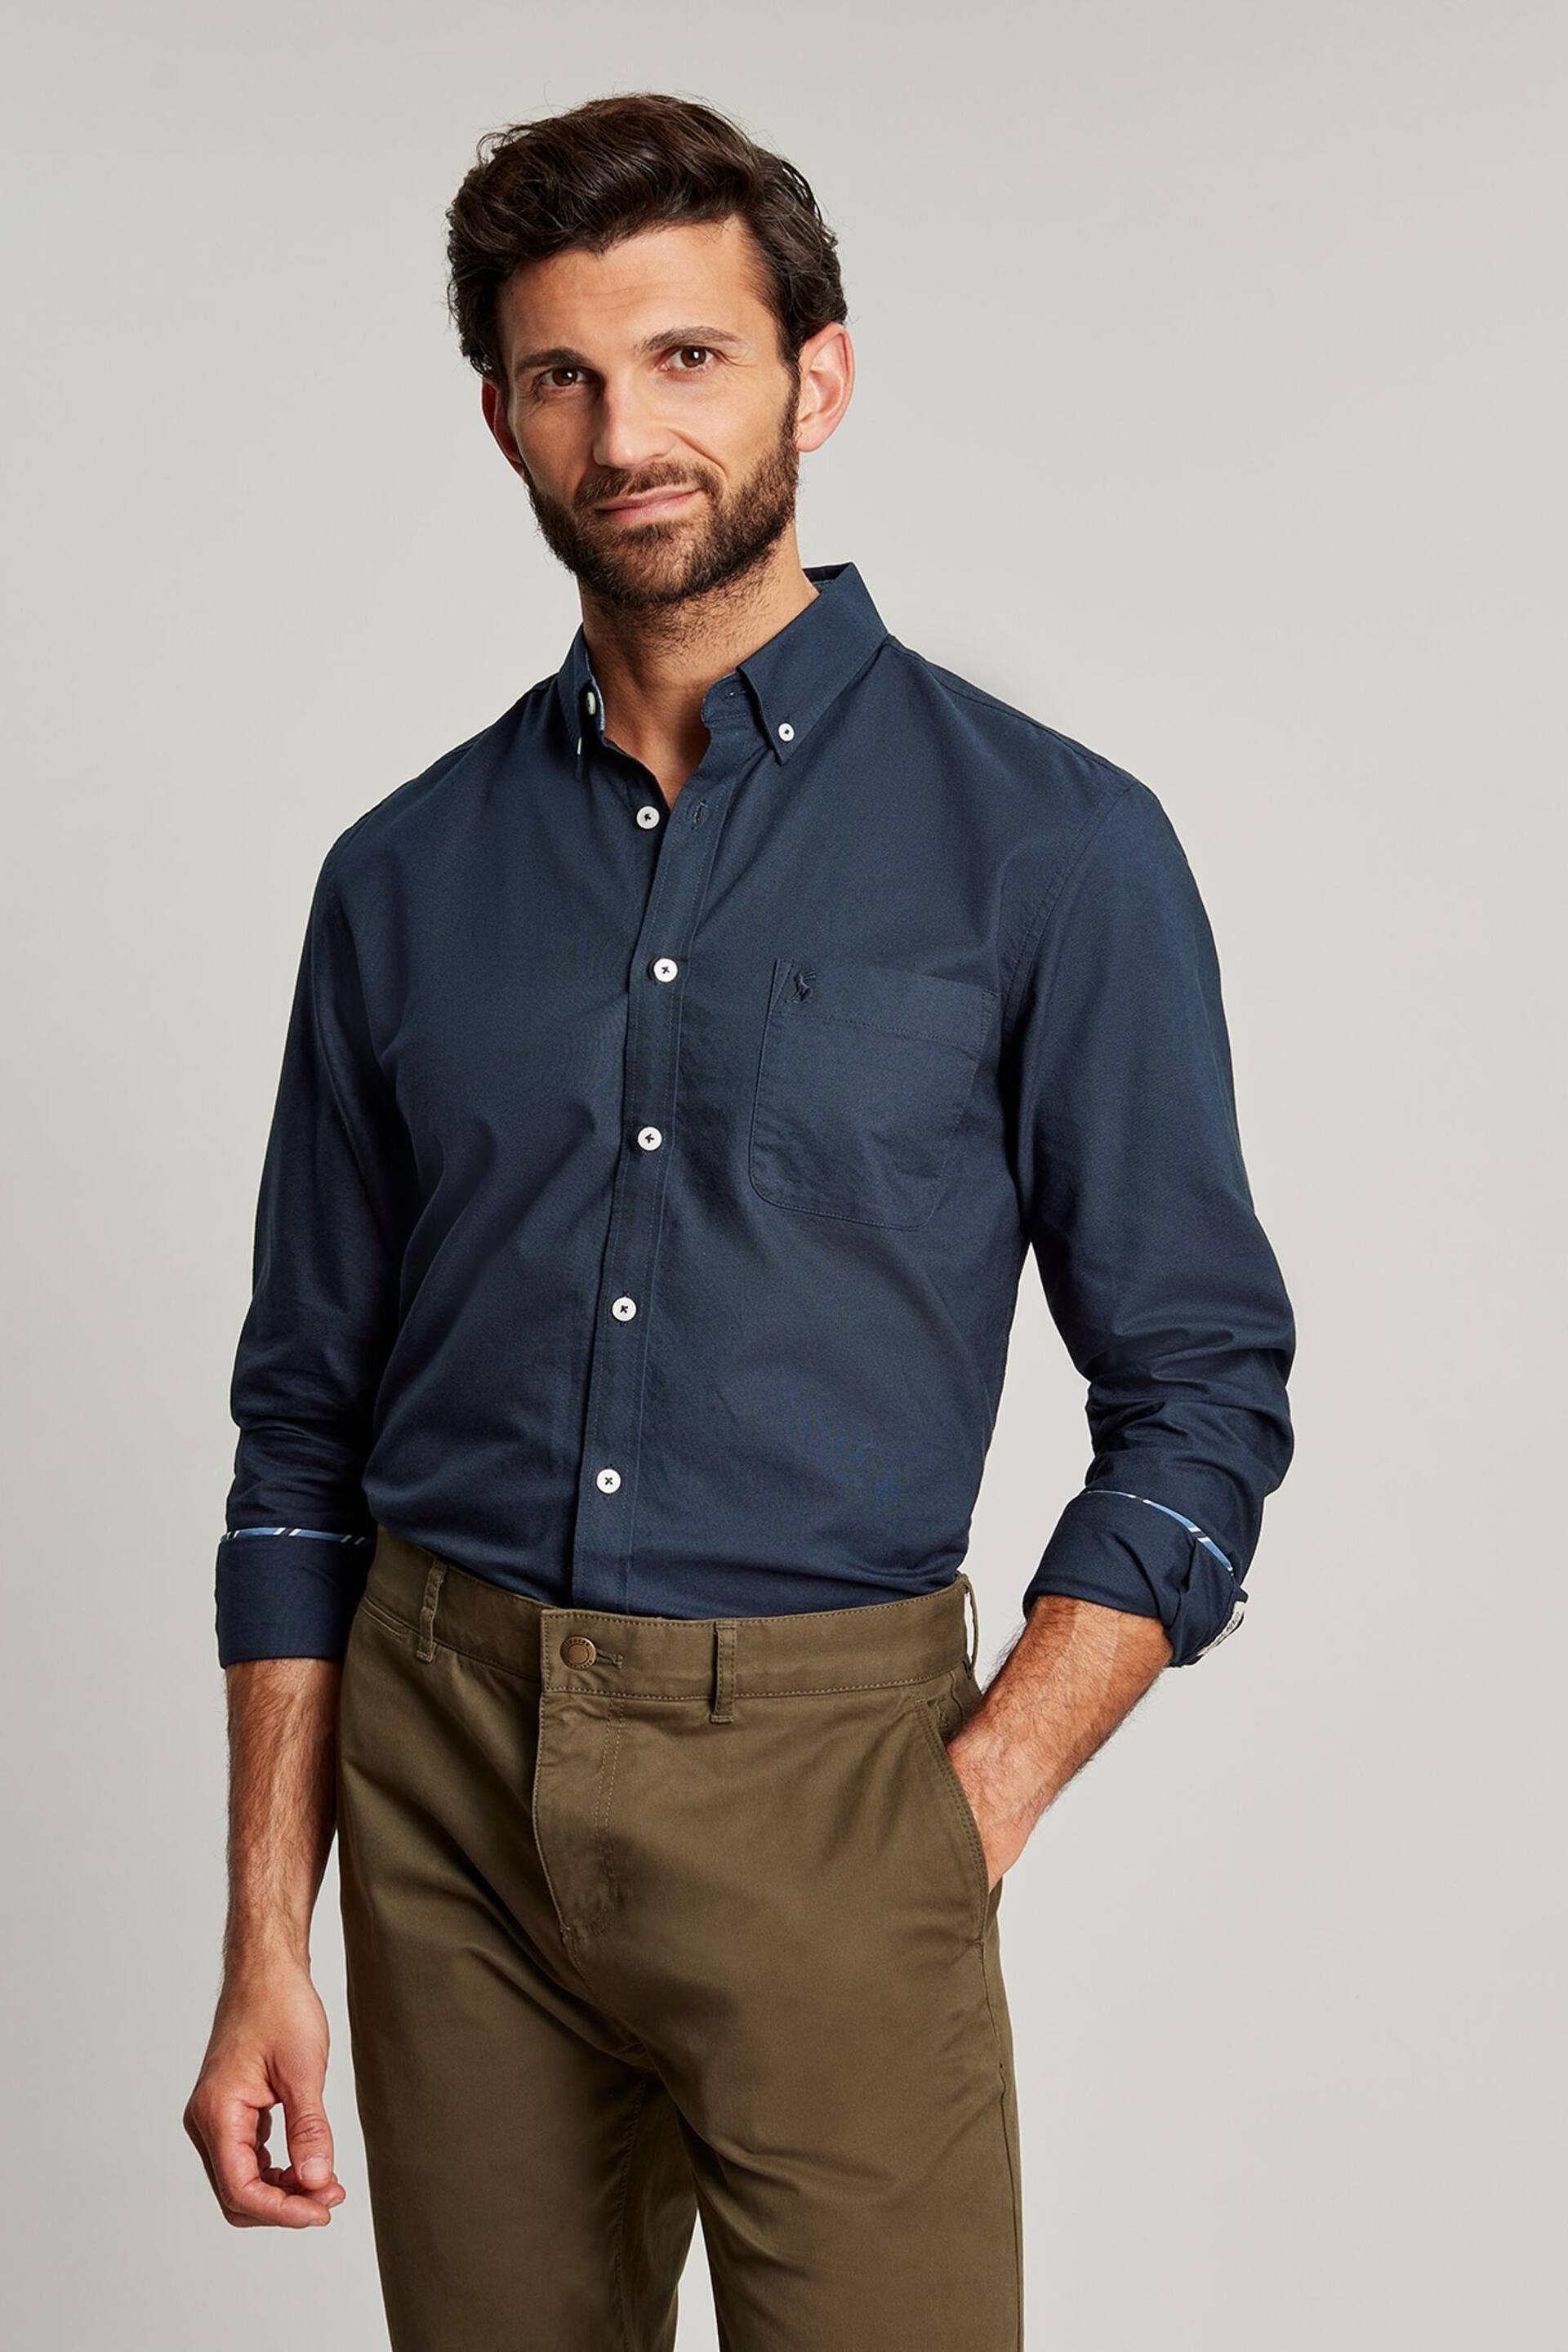 Joules Oxford Navy Blue Long Sleeve Oxford Shirt - Image 5 of 7